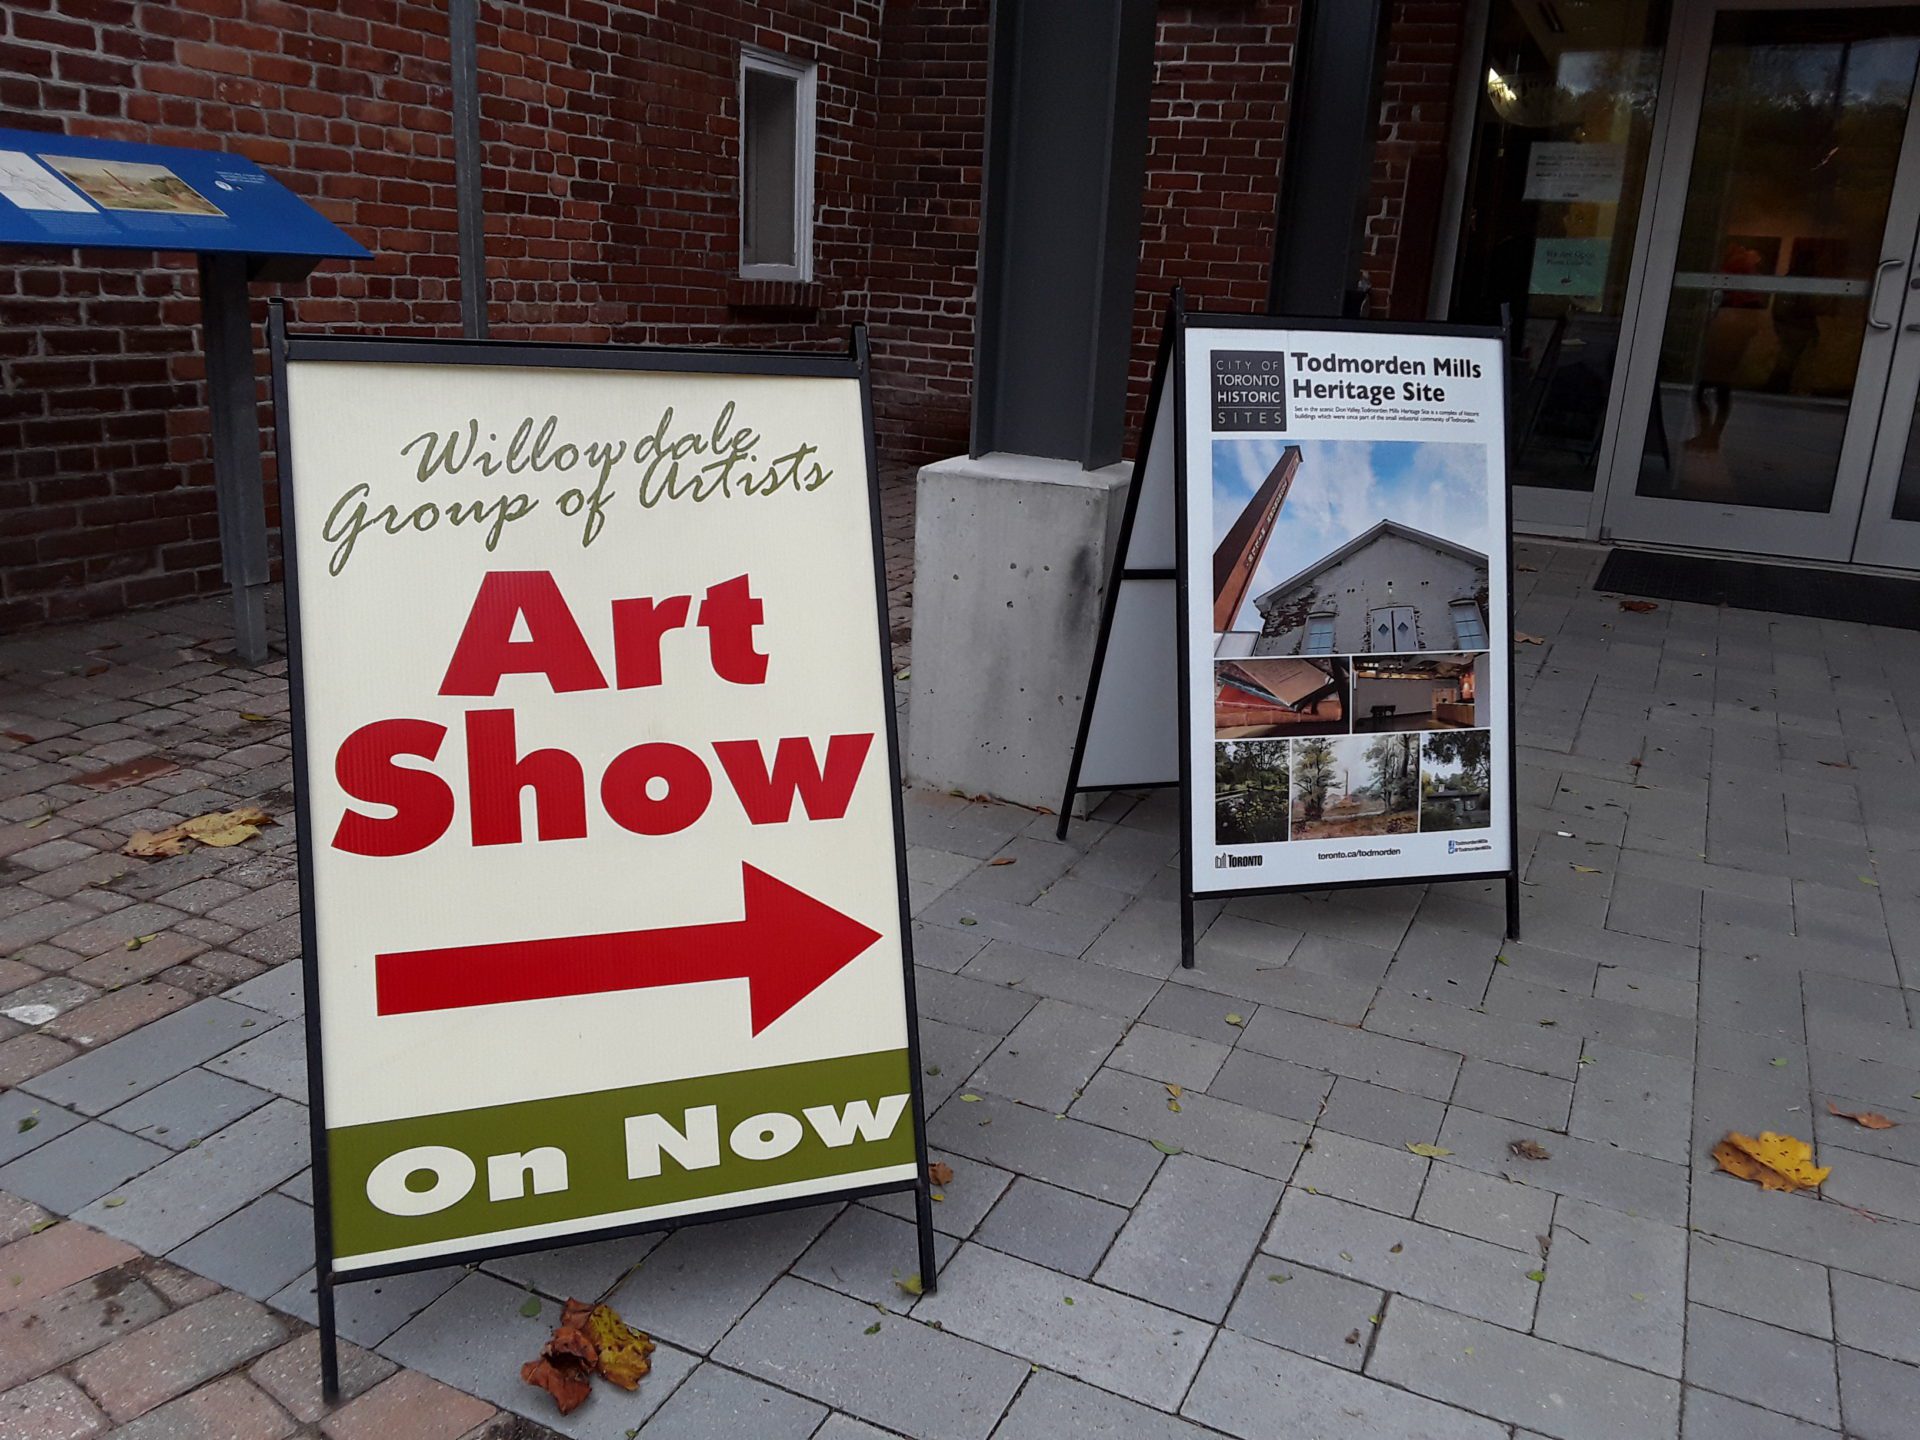 Willowdale Group of Artists' fall art show